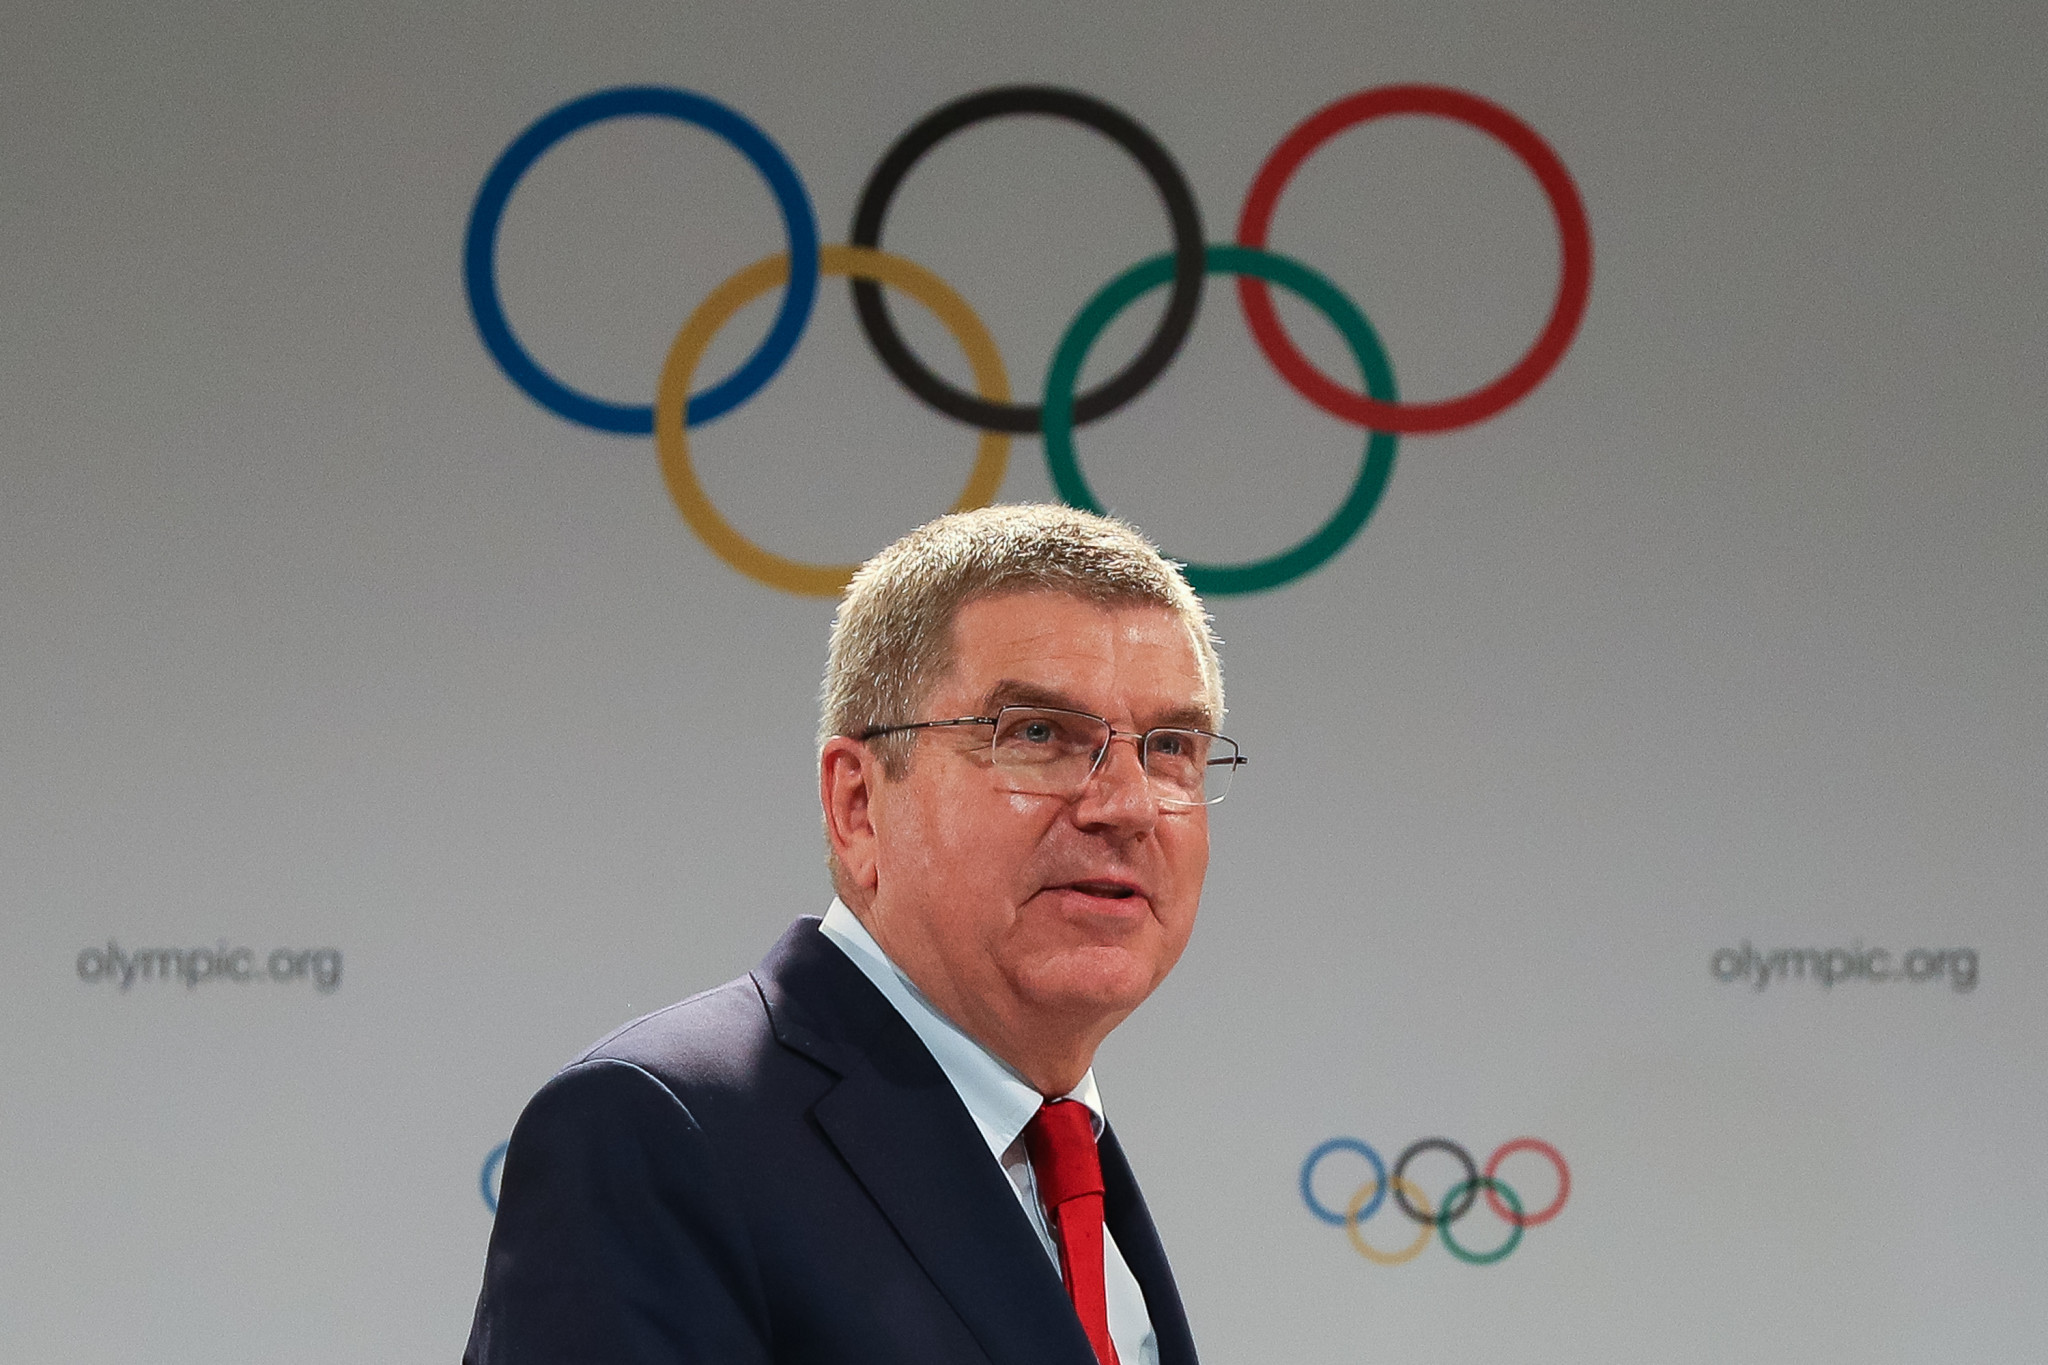 IOC President Thomas Bach has appealed to owners of NHL teams to allow athletes to compete at Pyeongchang 2018 ©Getty Images